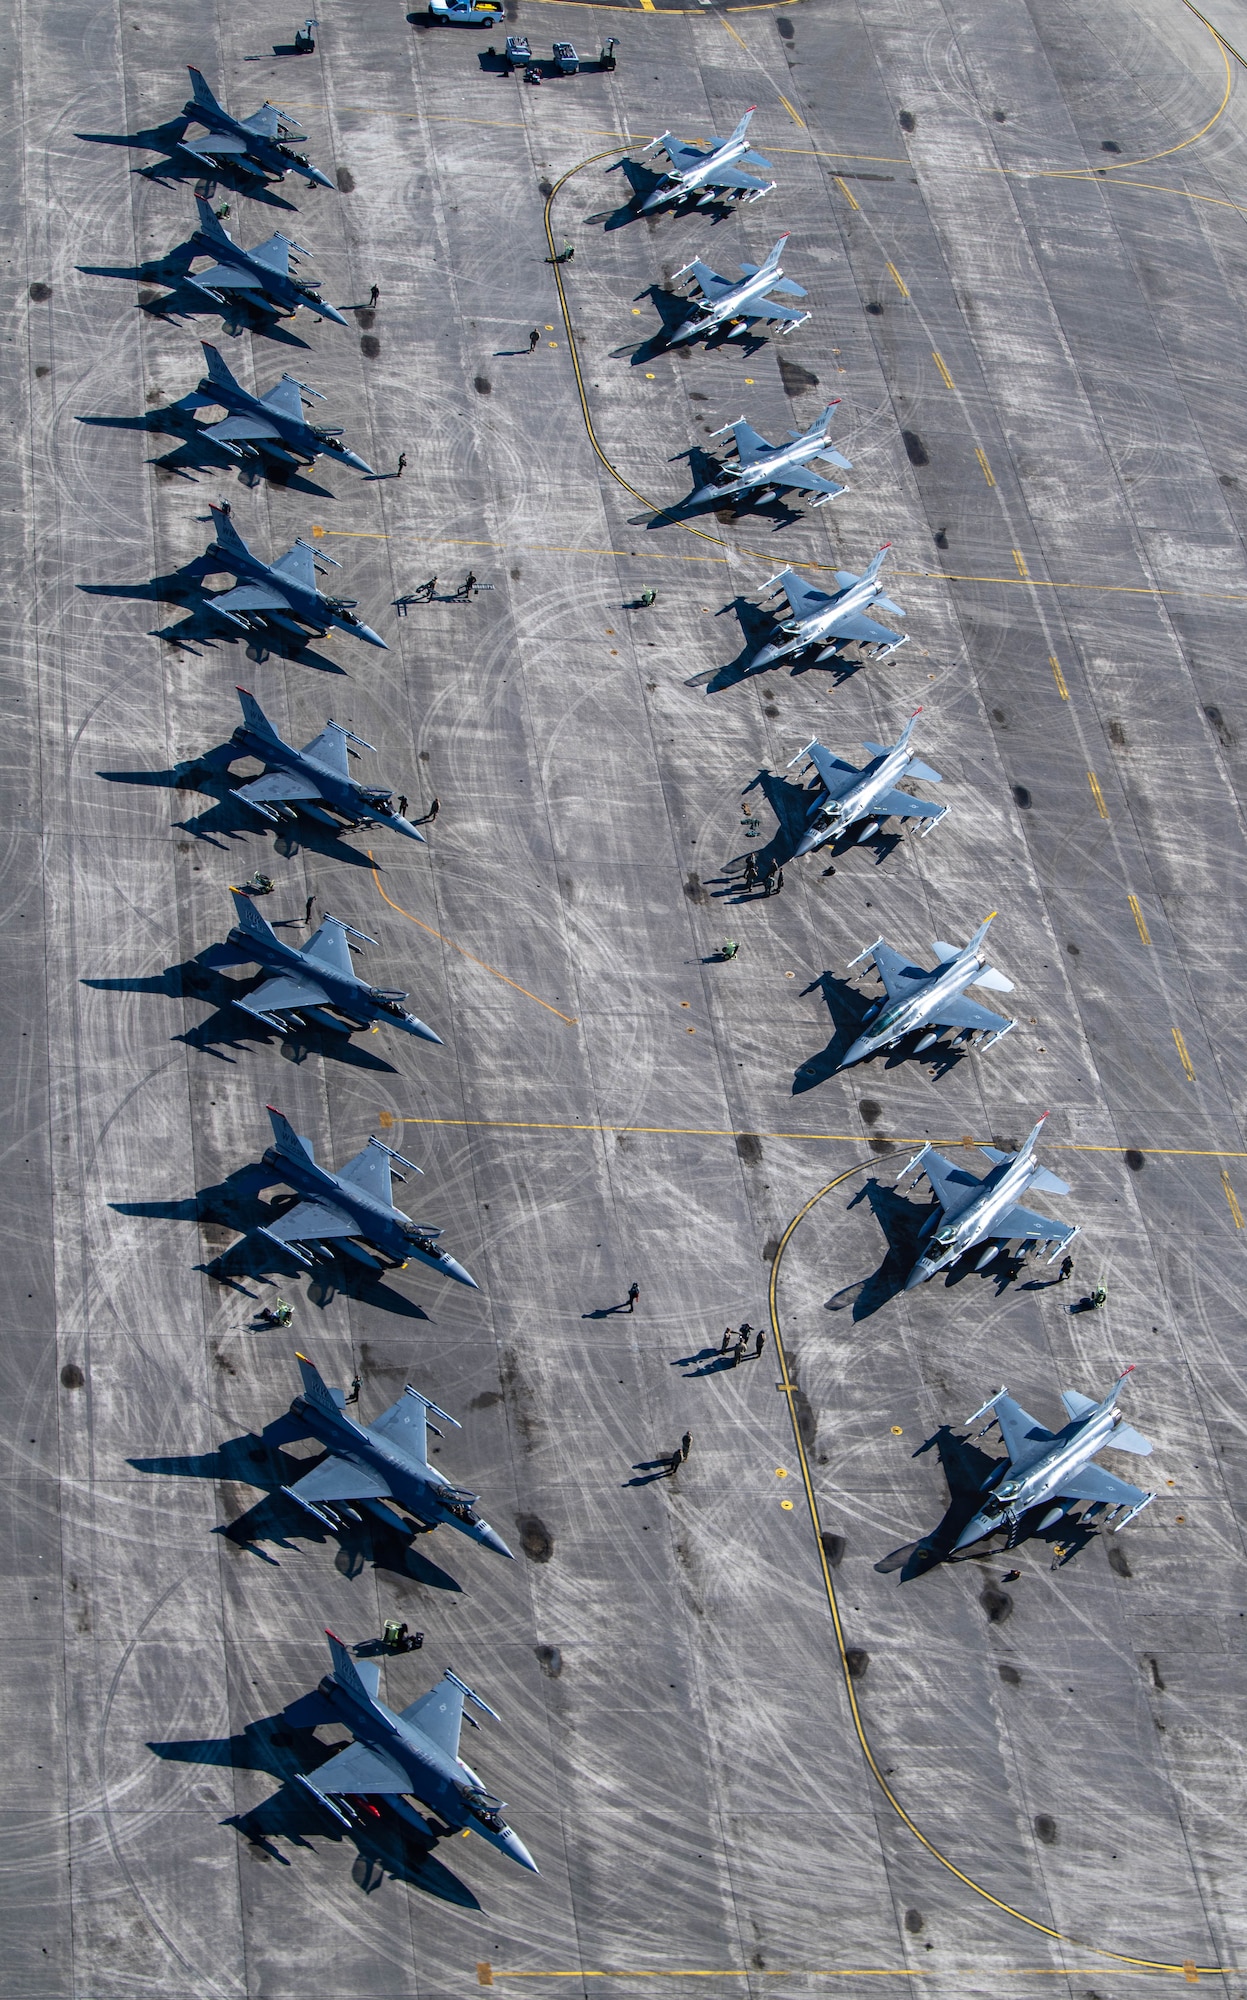 Top-down view of 15 F-16 Fighting Falcons sitting on a flightline in two rows.